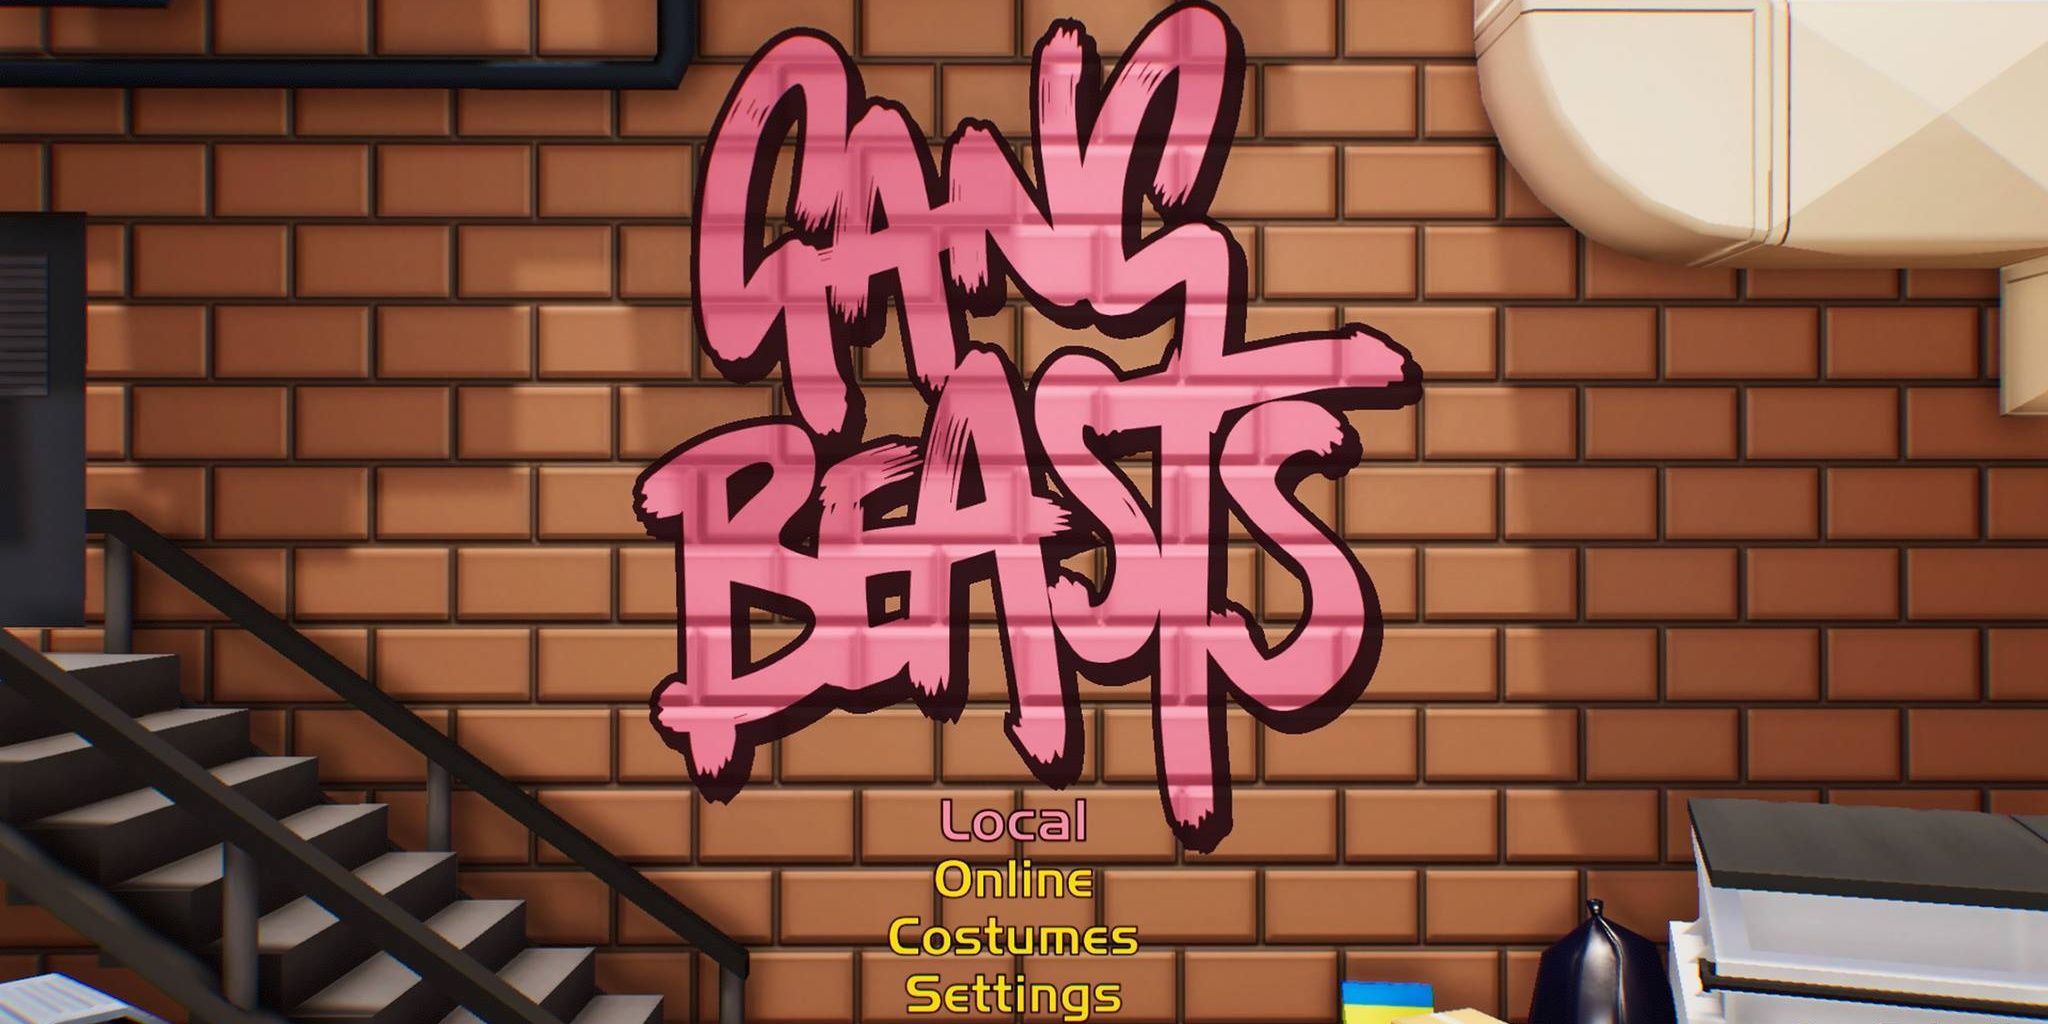 The starting menu for Gang Beasts